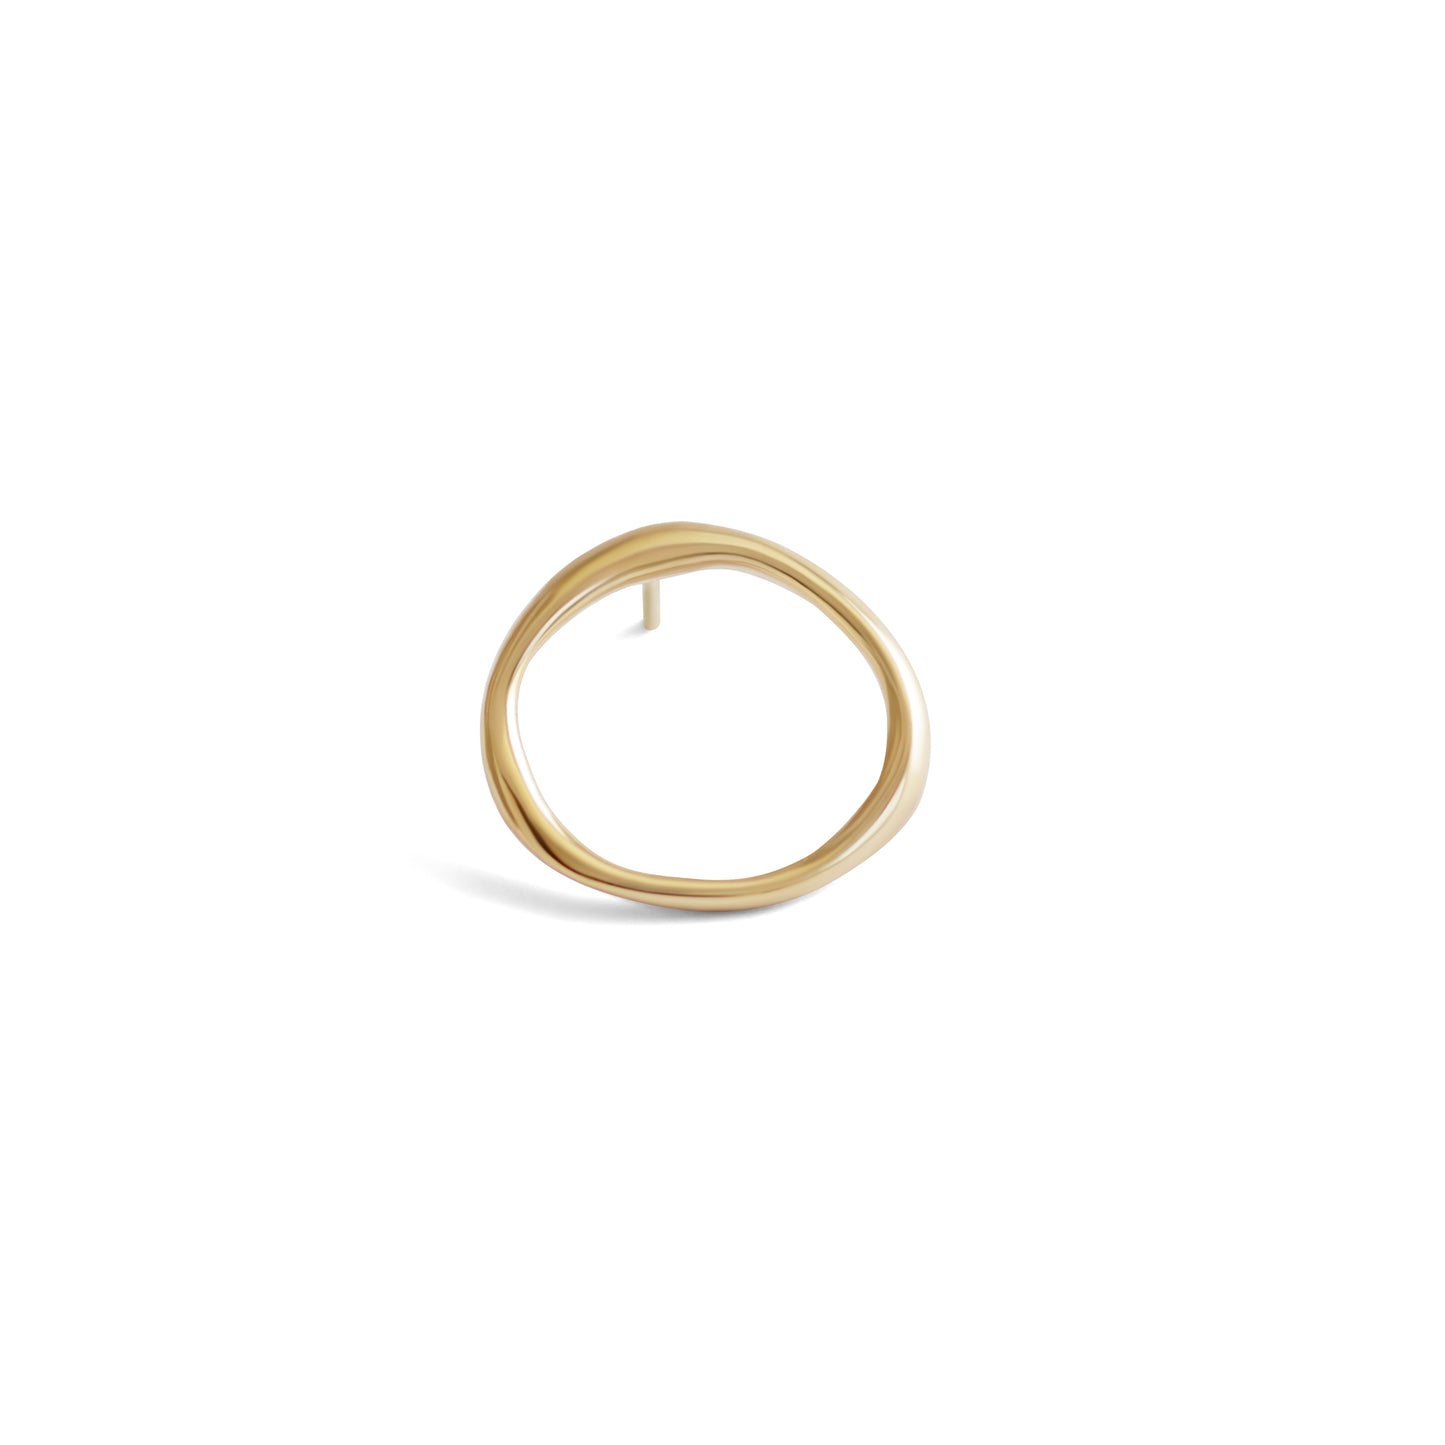 Load image into Gallery viewer, Amorphous Earring / Large Circle - Goldpoint Studio - Greenpoint, Brooklyn - Fine Jewelry
